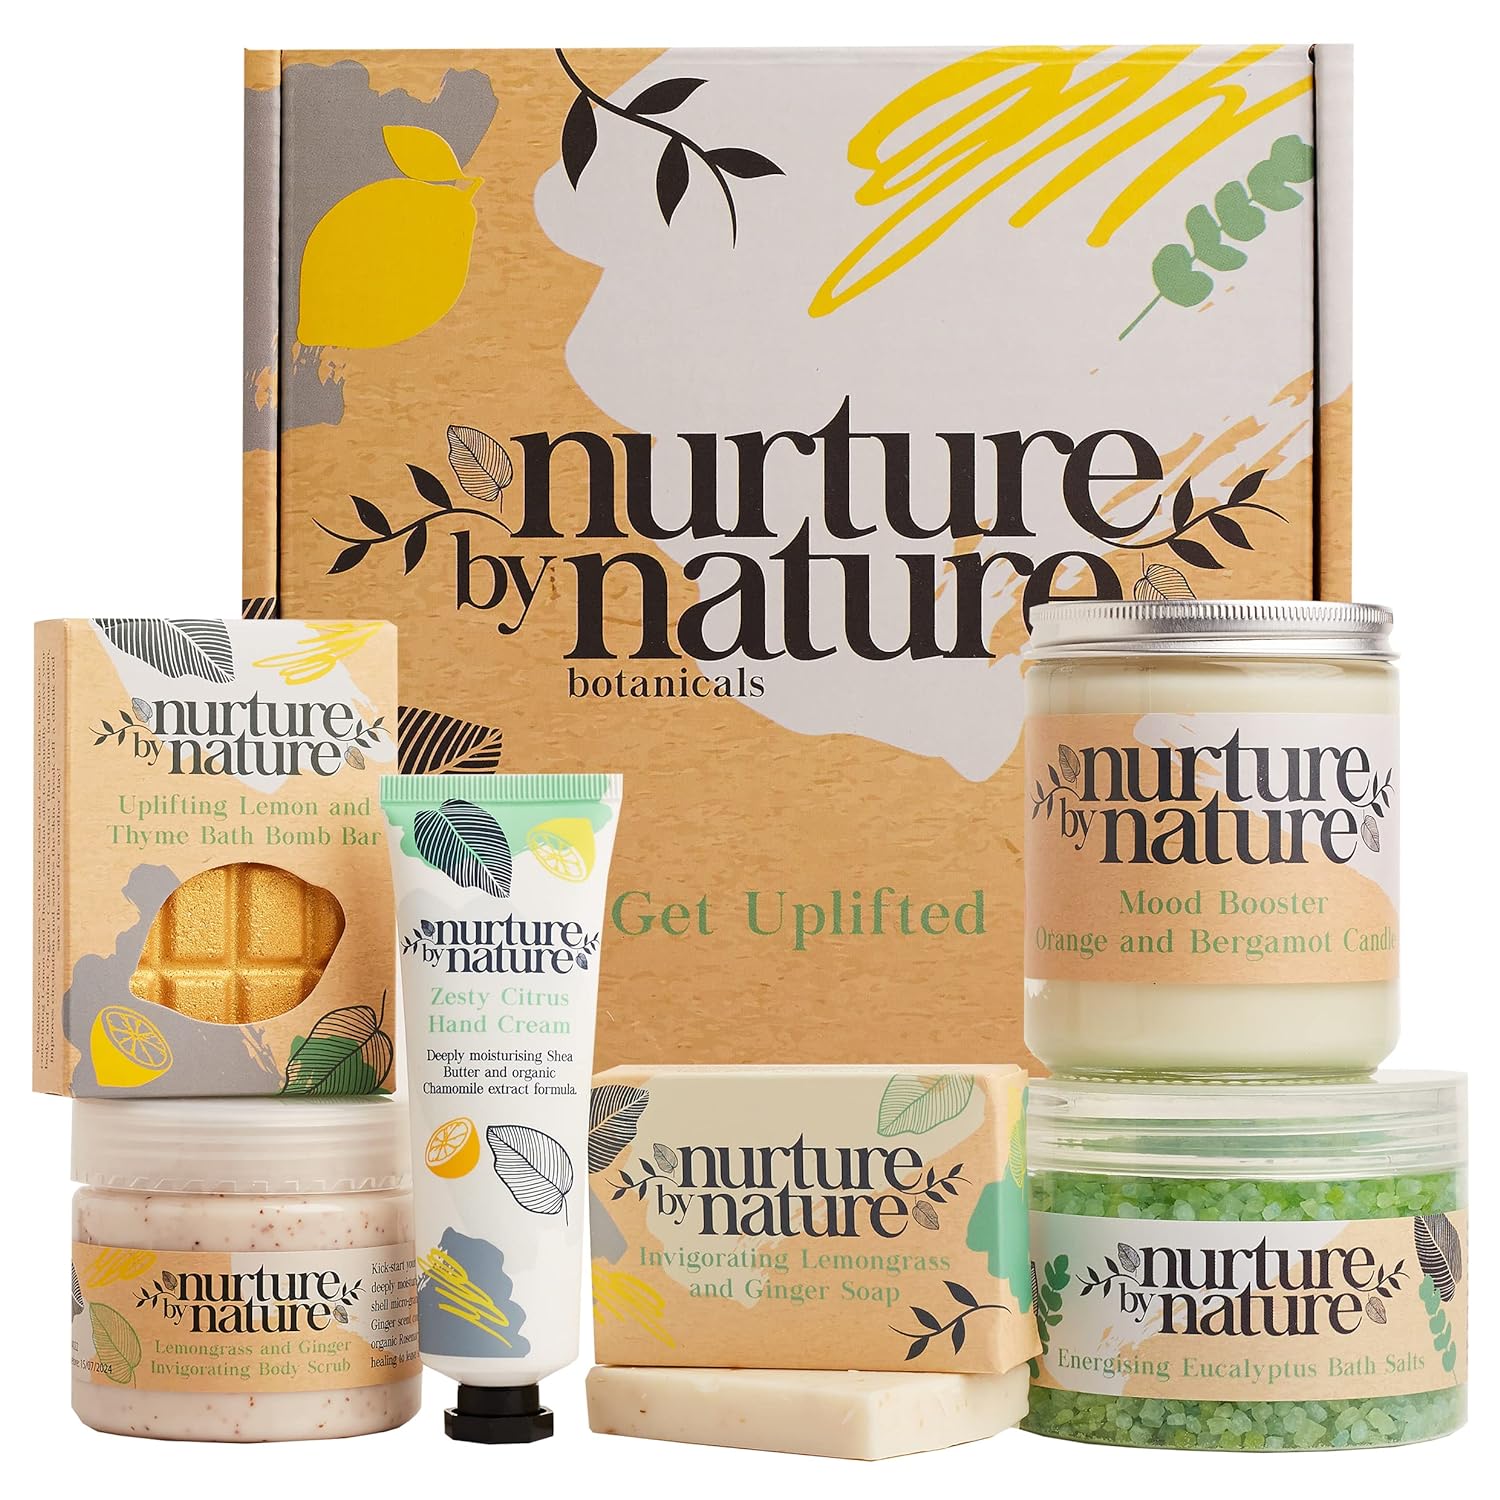 Nurture by Nature Relax  Uplift Pamper Spa Kit - Spa Gift Baskets for Women, Organic Self Care Kit - Bath Salts, Bath Bombs, Candle, Birthday  Mothers Day Gift - At Home Spa kit for women, Bath Set